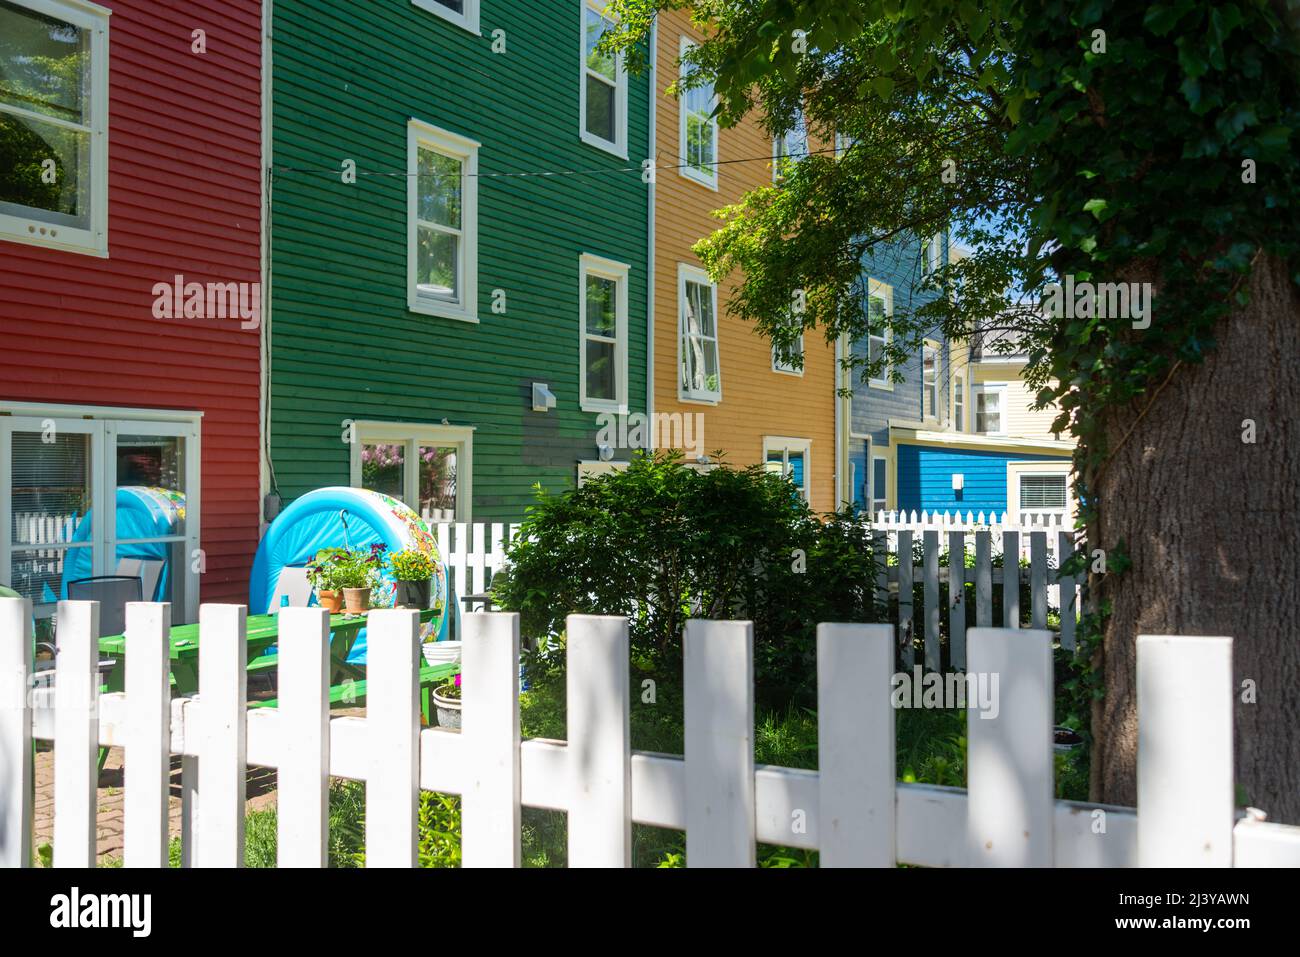 An upward view of an exterior of multiple joined colorful wooden houses with double hung windows. There are red, green, yellow, and blue houses. Stock Photo